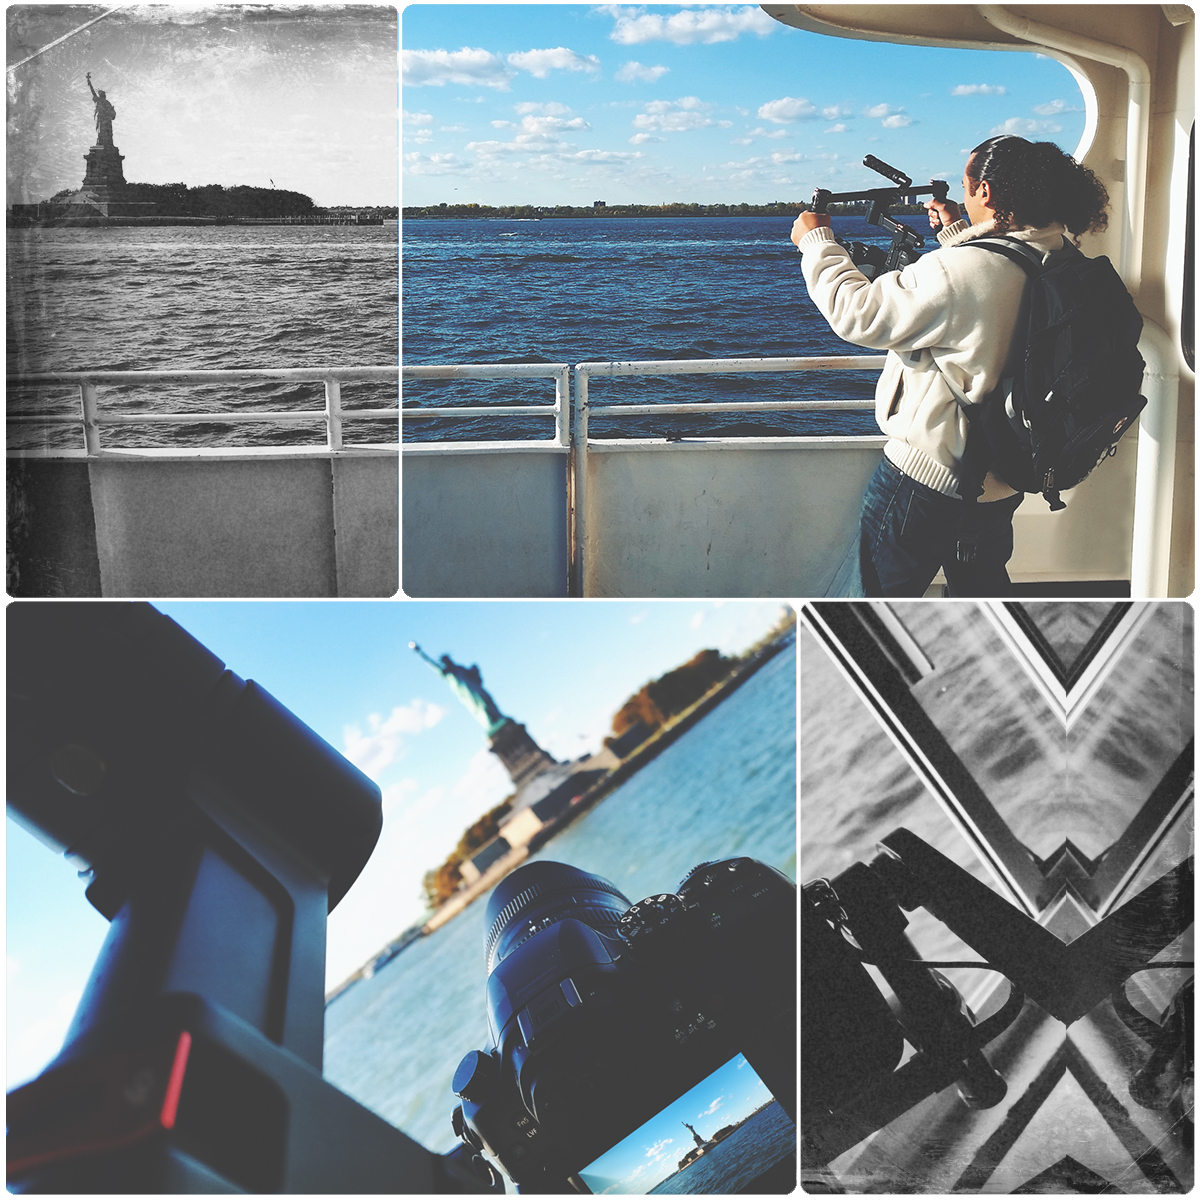 Masar on a boat trip with @HornBlowerNY getting b-roll